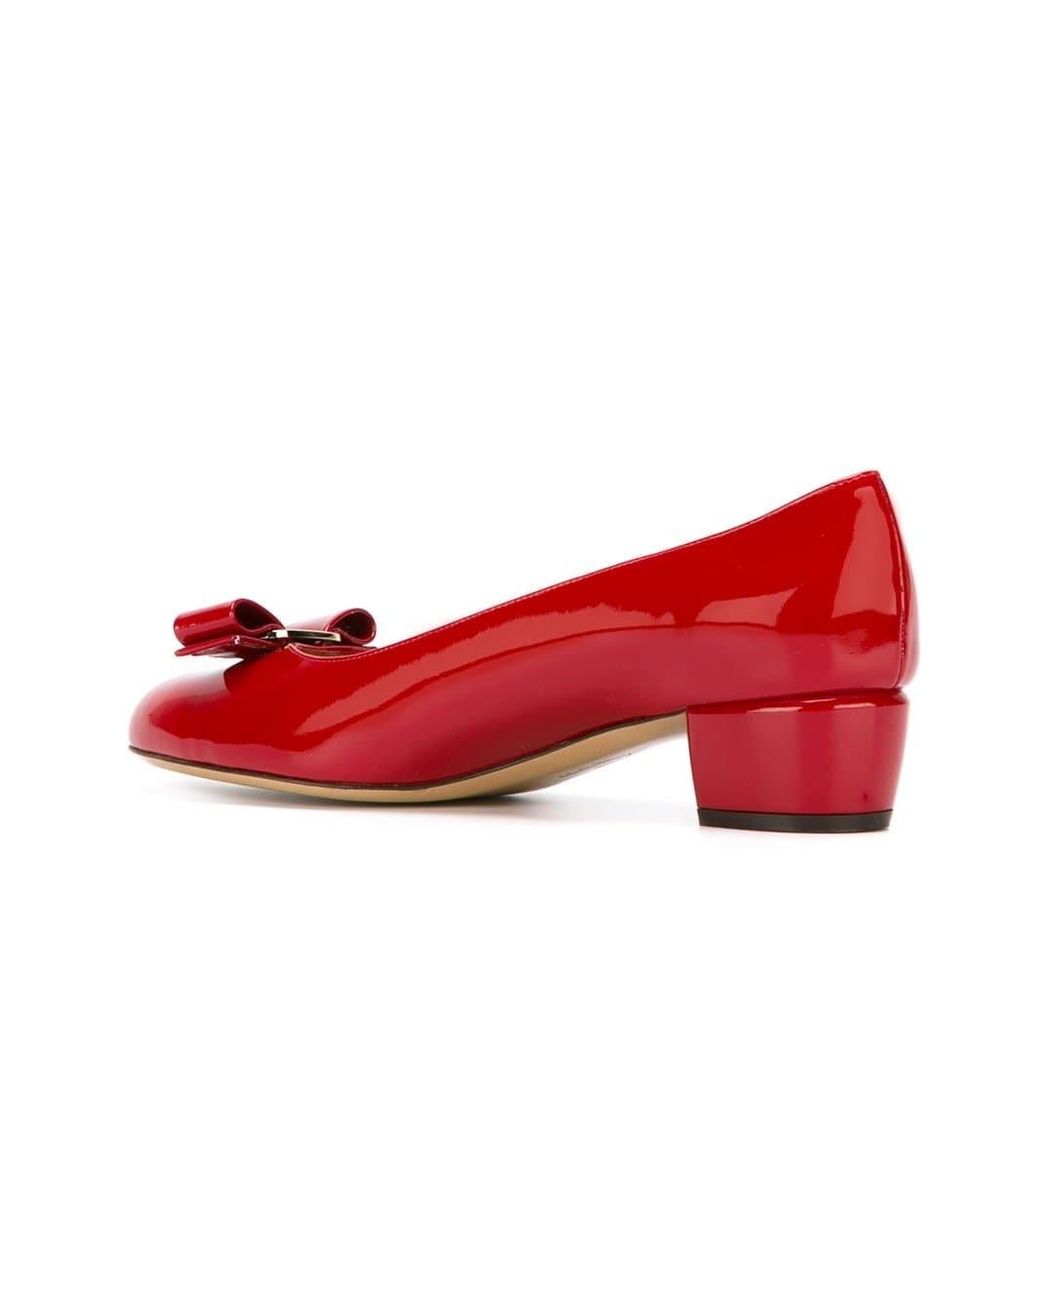 Ferragamo Leather Vara Bow Pumps in Red - Save 50% - Lyst